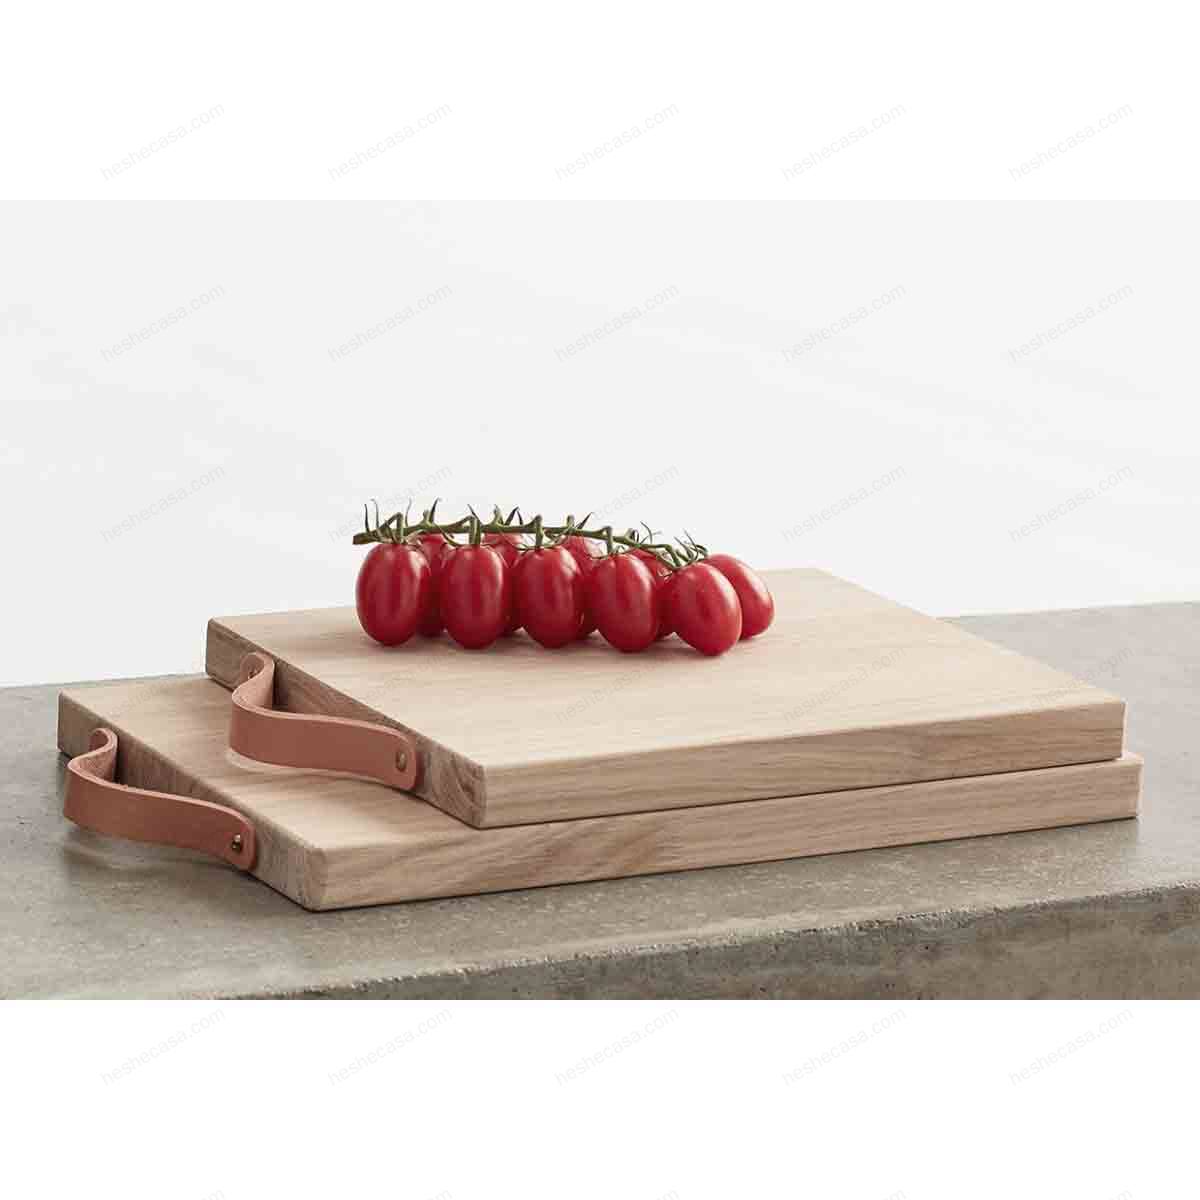 Serving Board With A Leatherhandle 切菜板